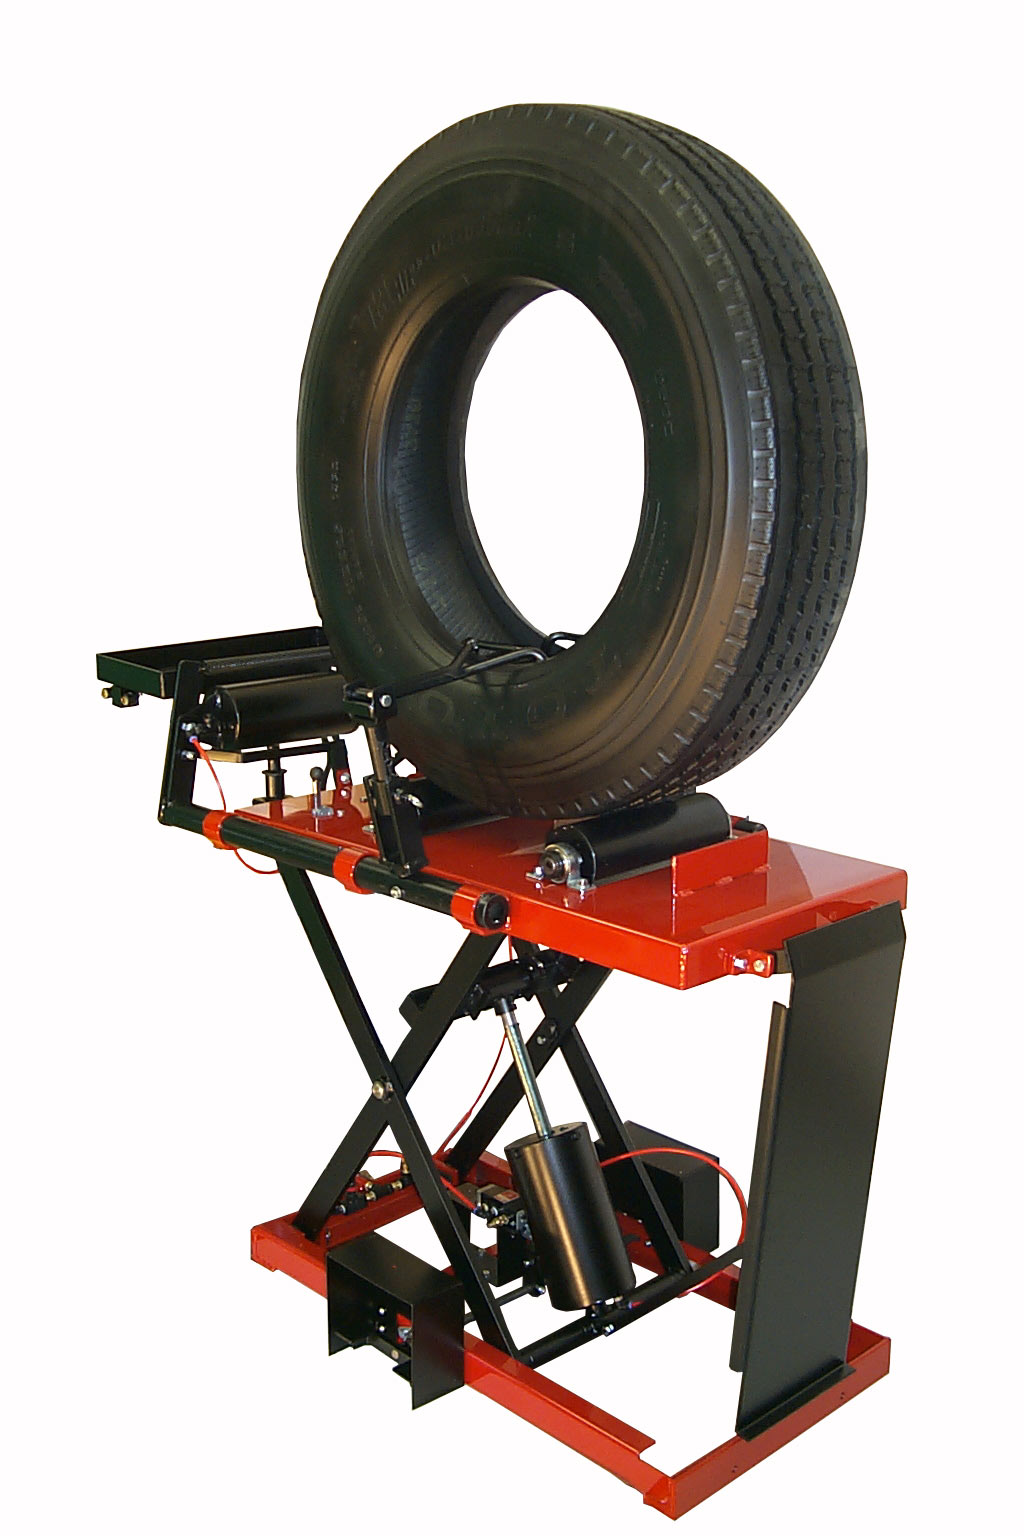 [DISCONTINUED] Branick USA Made 5500 Air Powered Tire Spreader